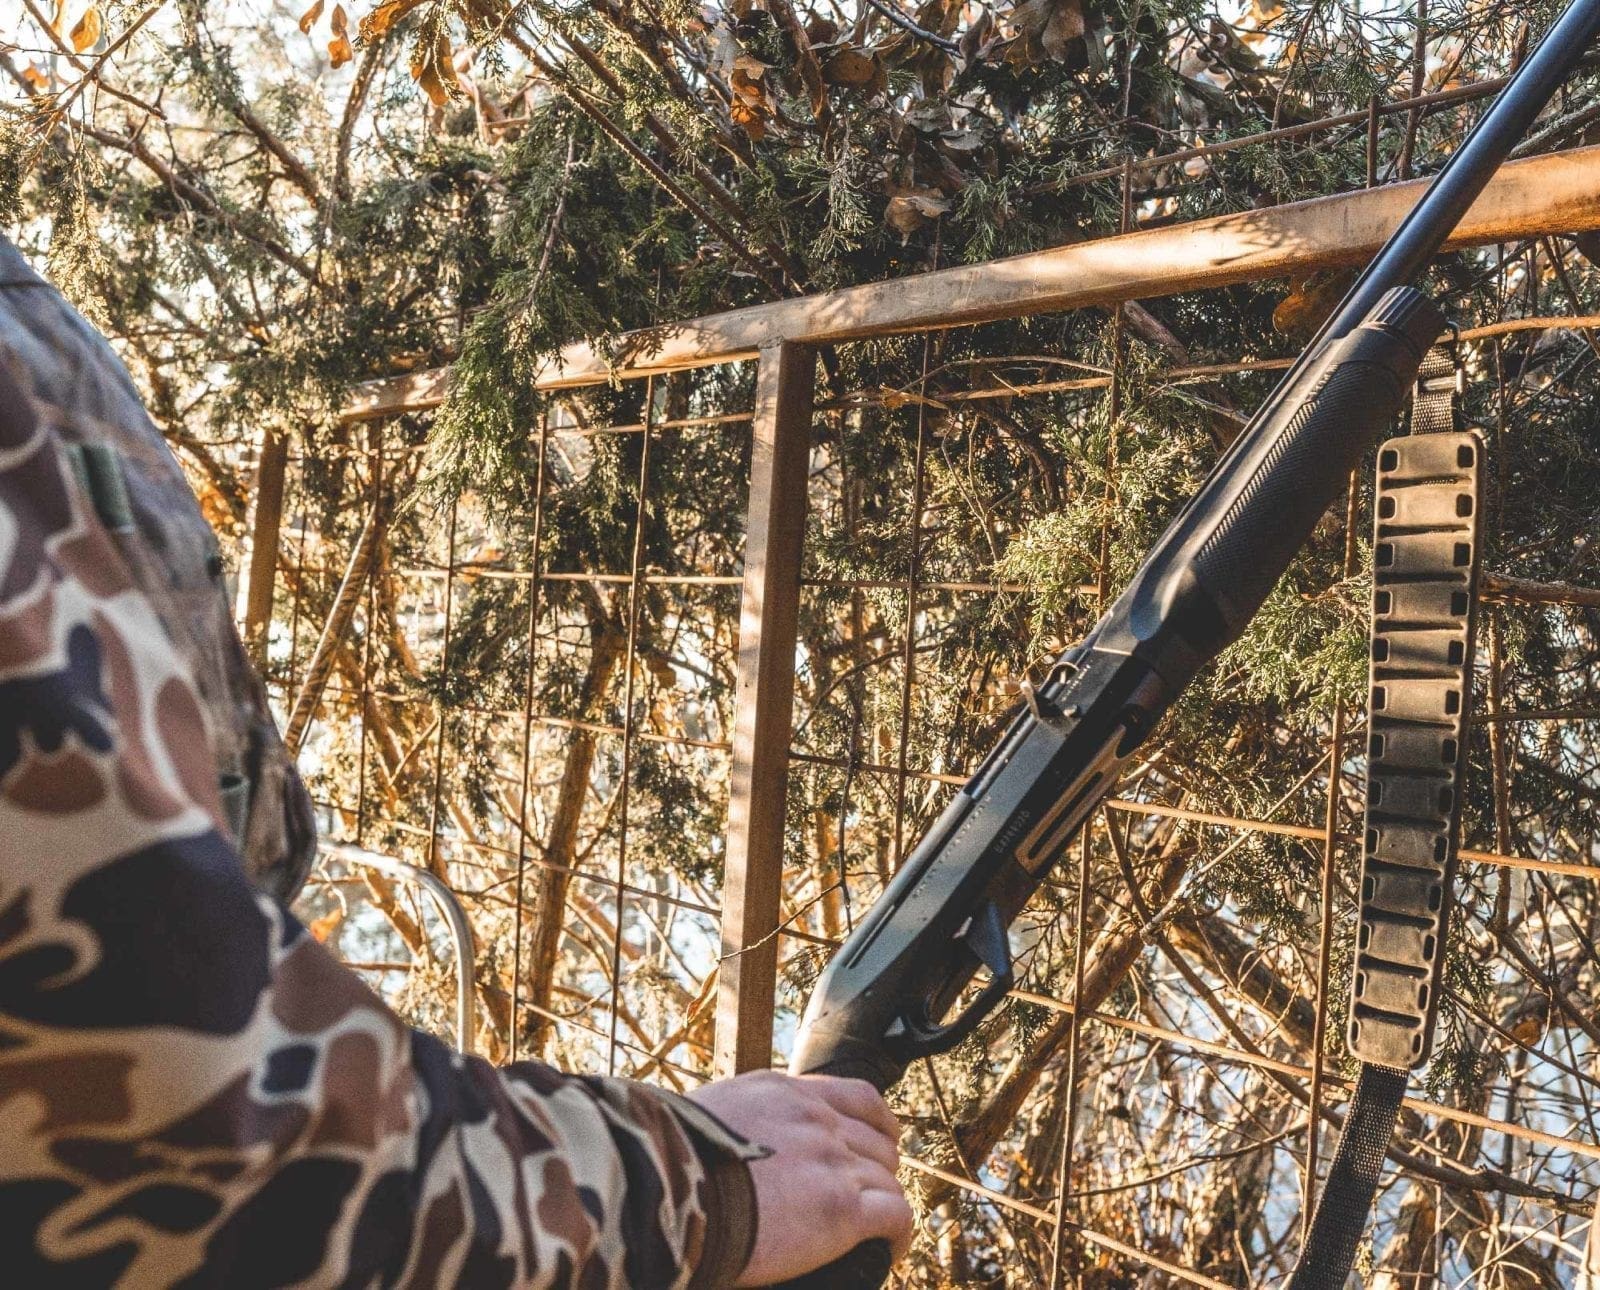 Duck Blinds on a Budget - Waterfowl Hunting - Project Upland